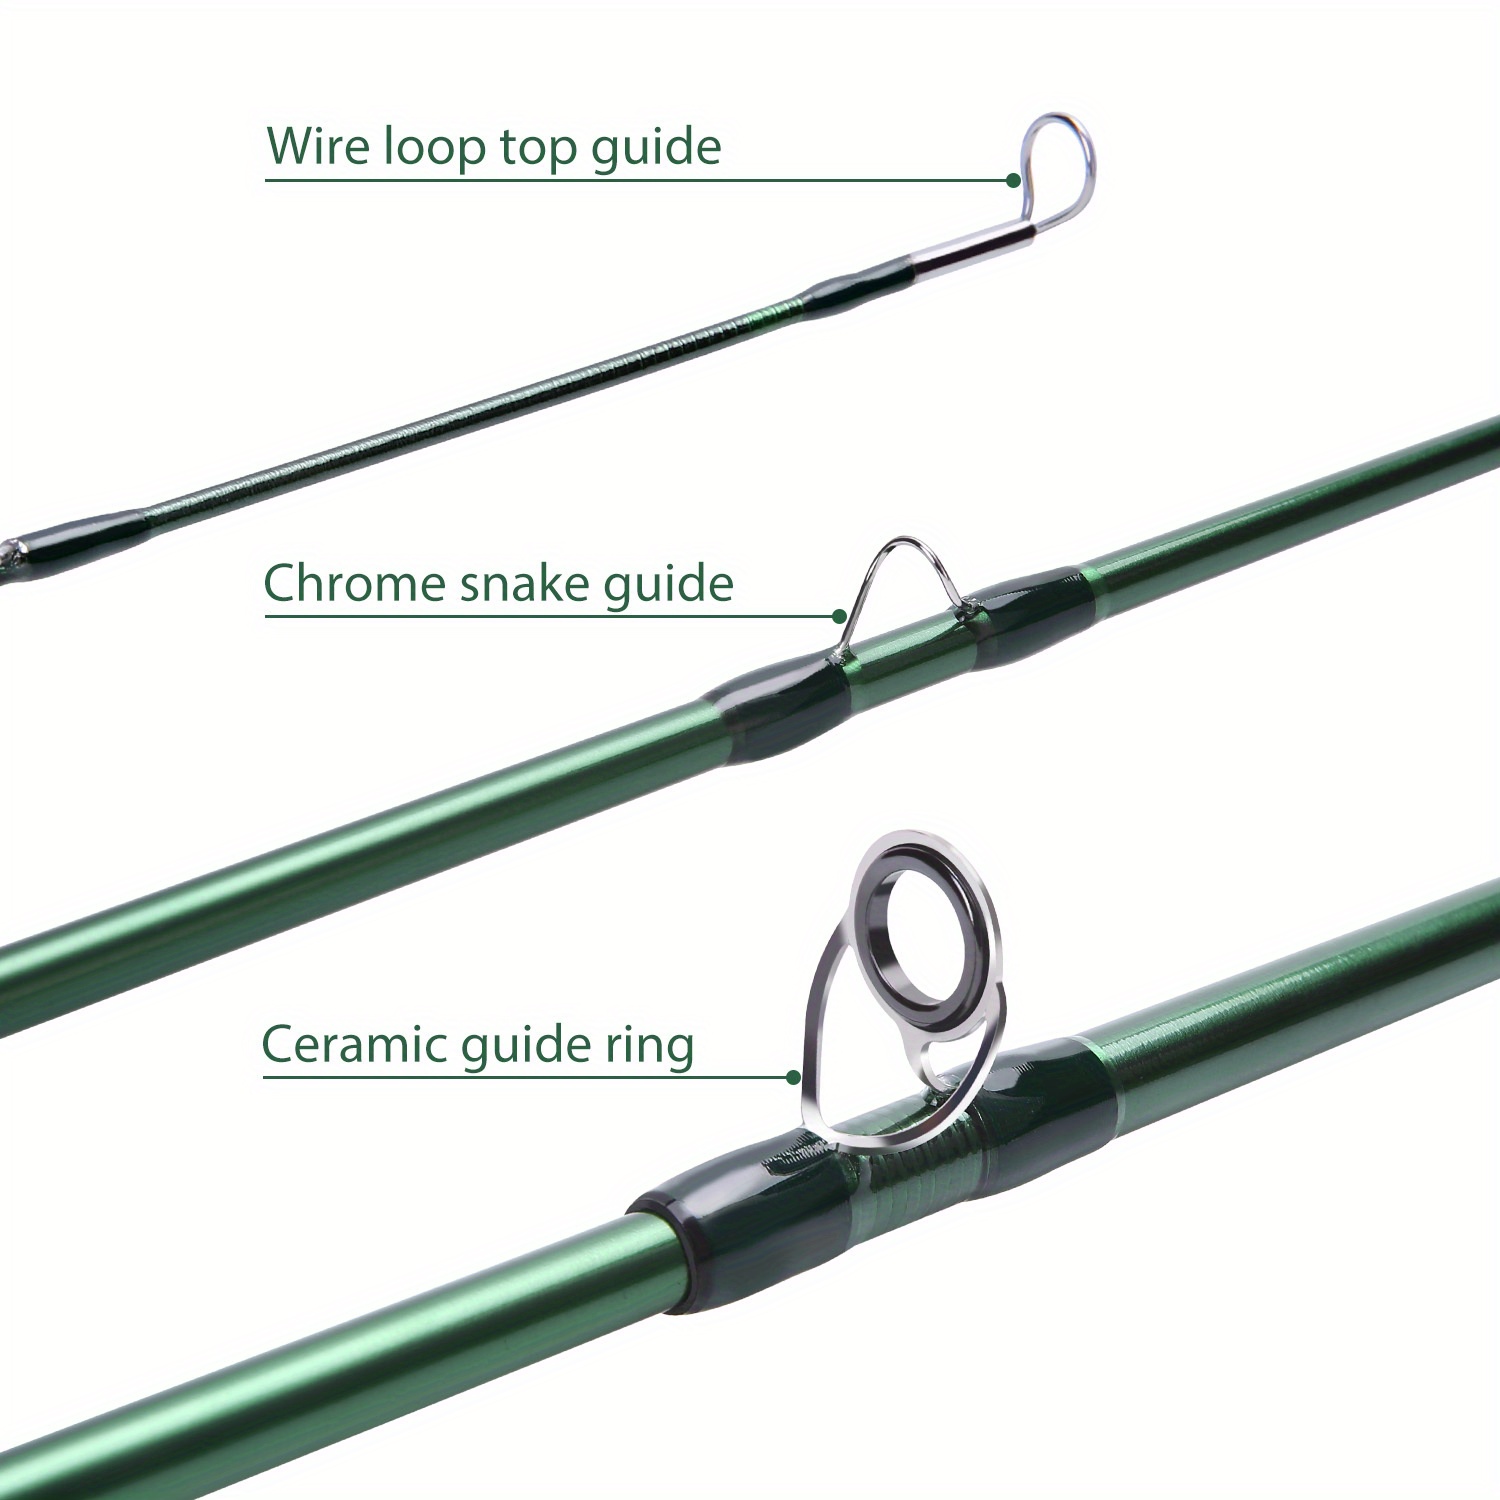 5pcs Fishing Rods, Green 30T Carbon Fiber Fly Fishing Rod, 274.32 Cm 7/8wt  Fishing Rod, Suitable For Fly Fishing, Fishing Tackle